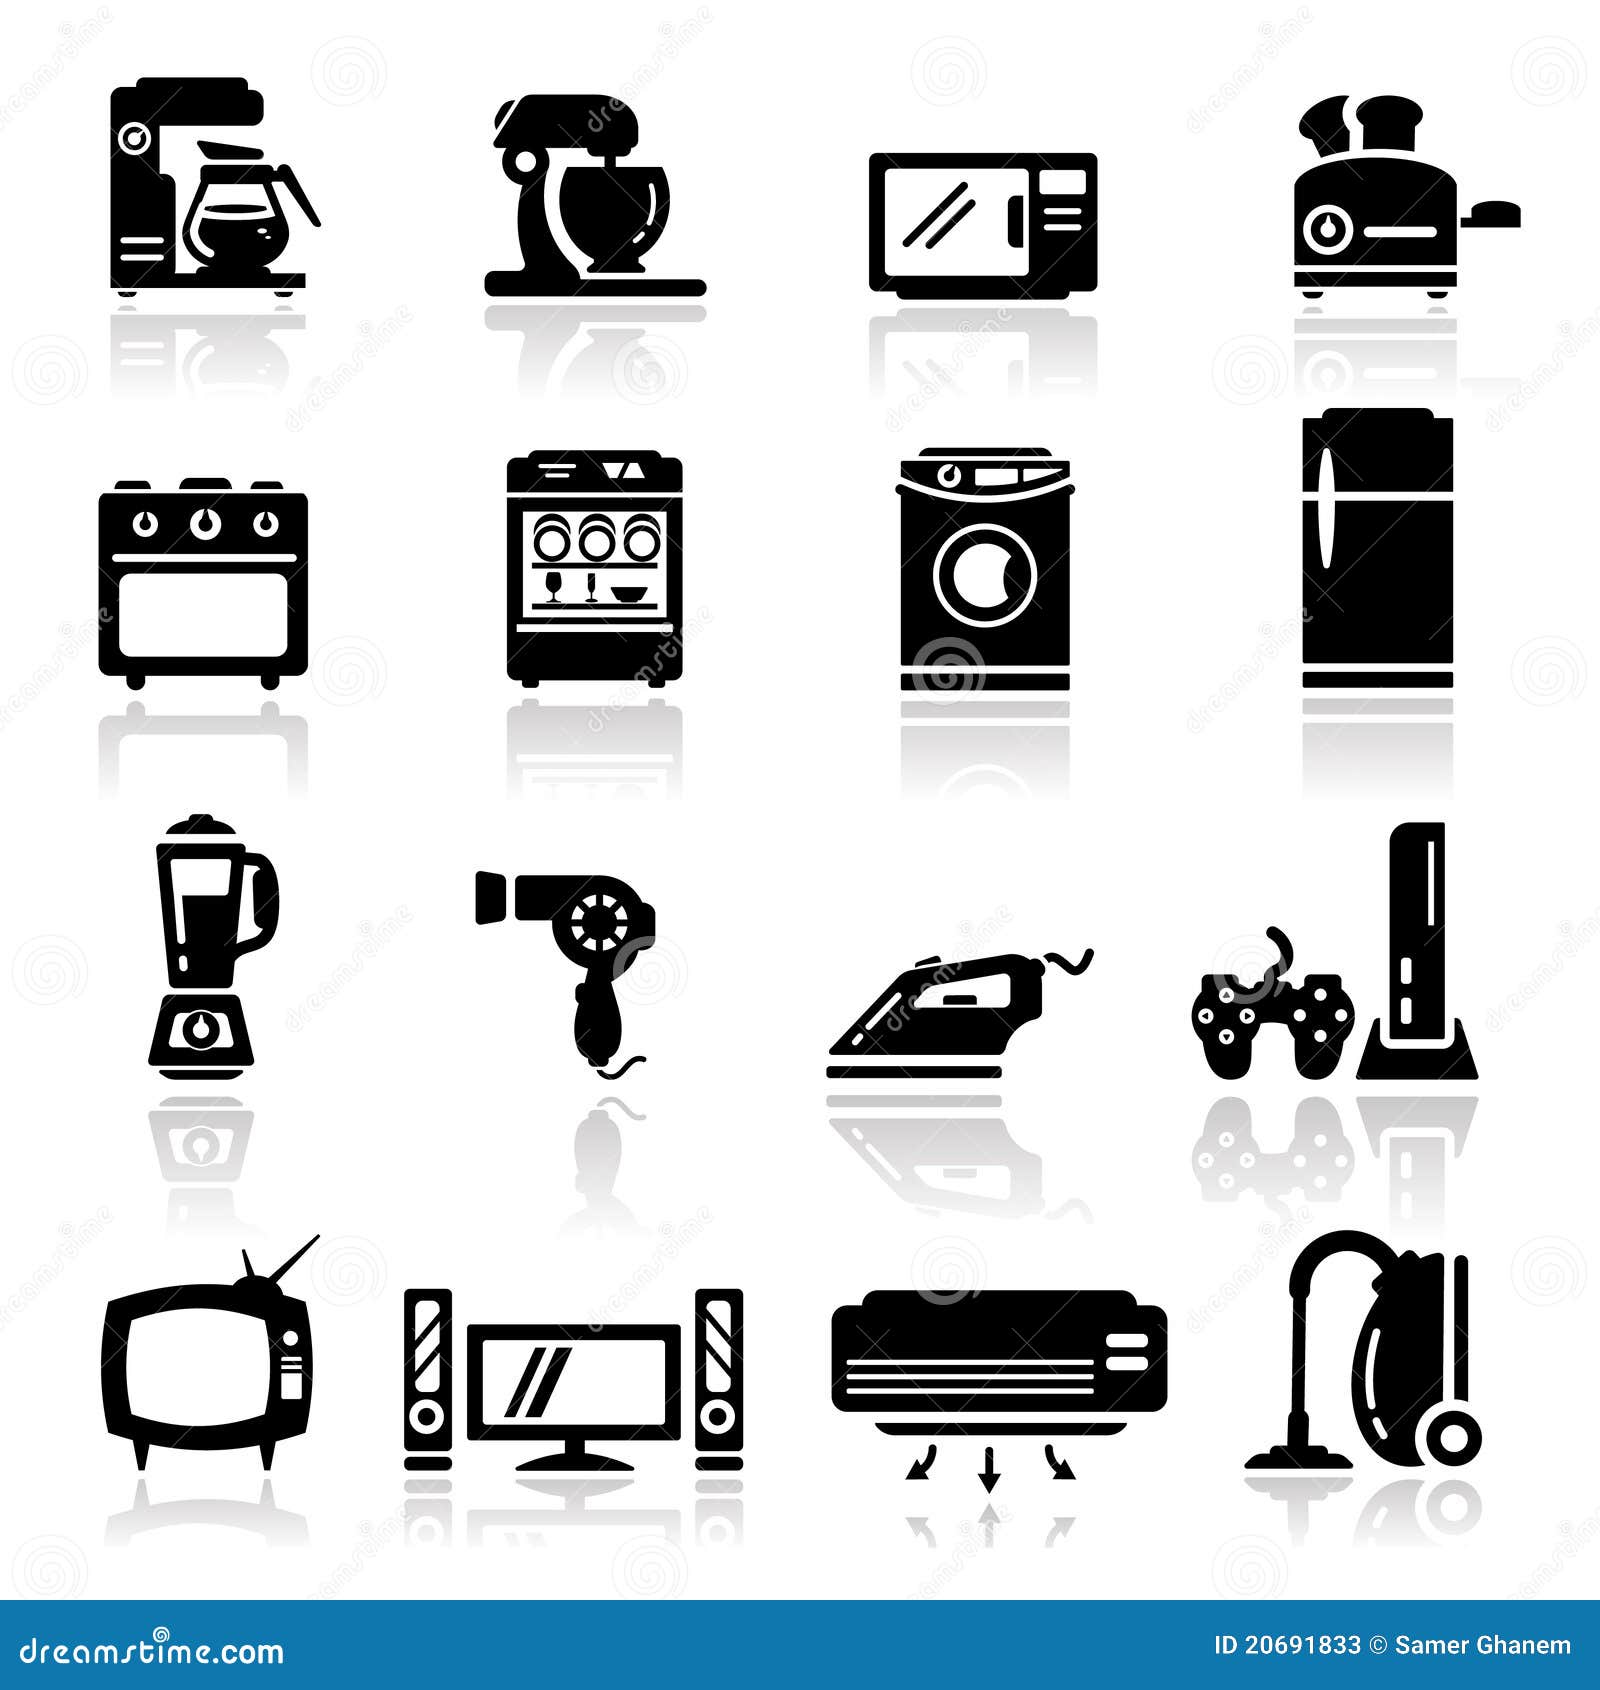 Home appliances icon set Free vector in Adobe